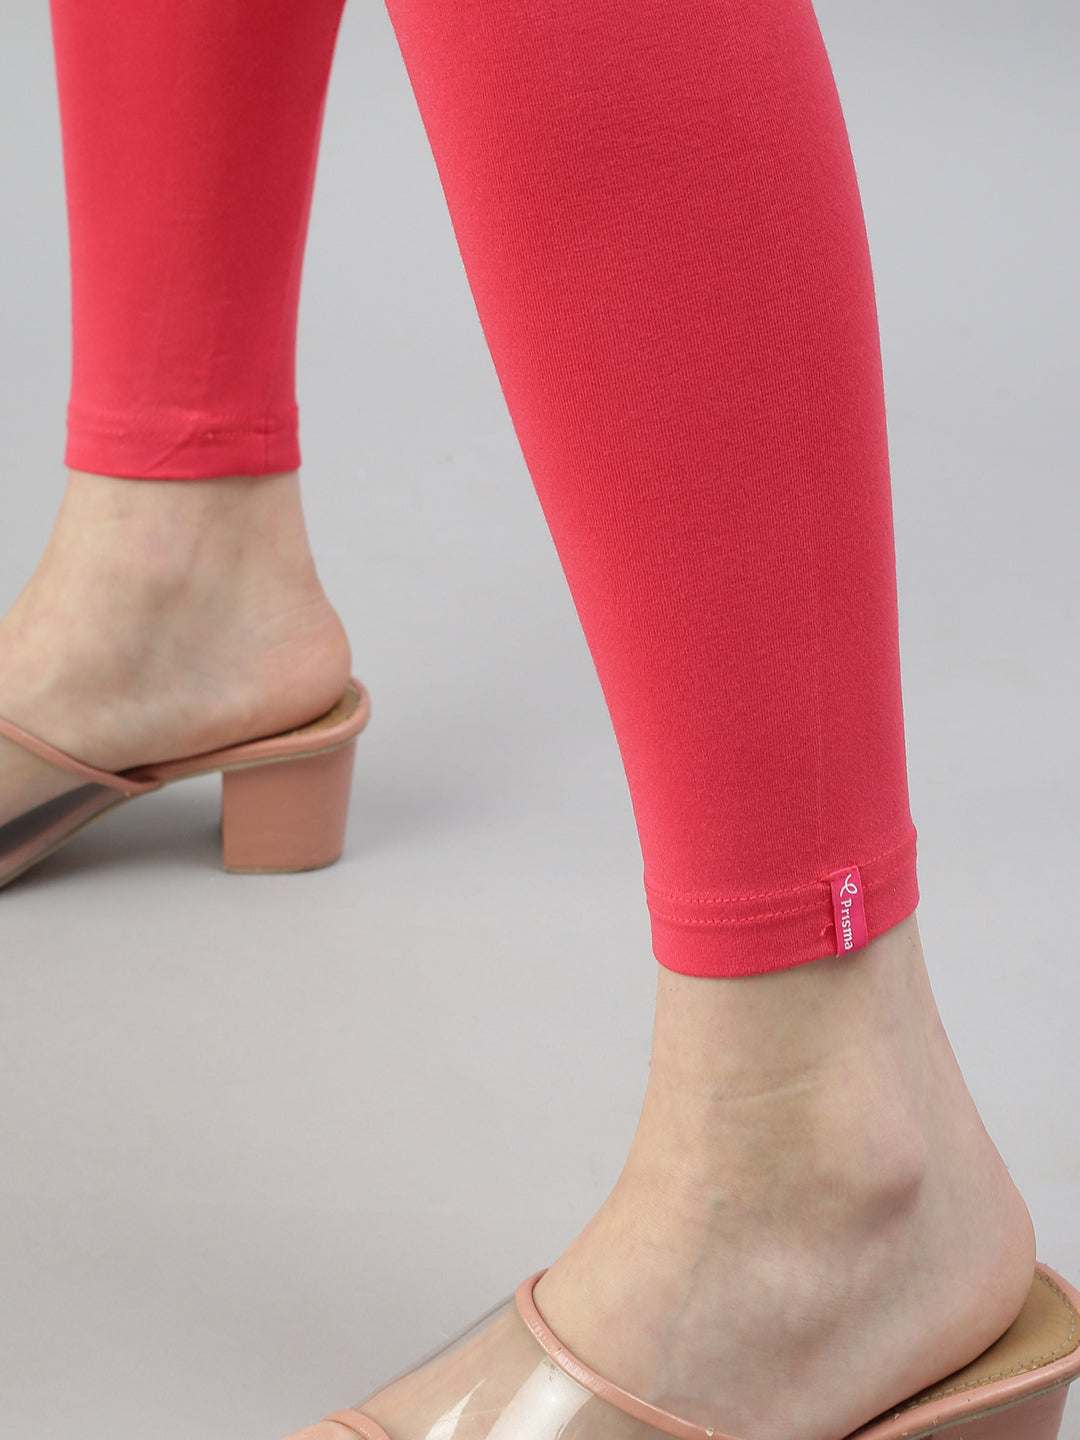 Prisma Full Length Peach Coral - M, Coral at Rs 190, Ankle Length Leggings